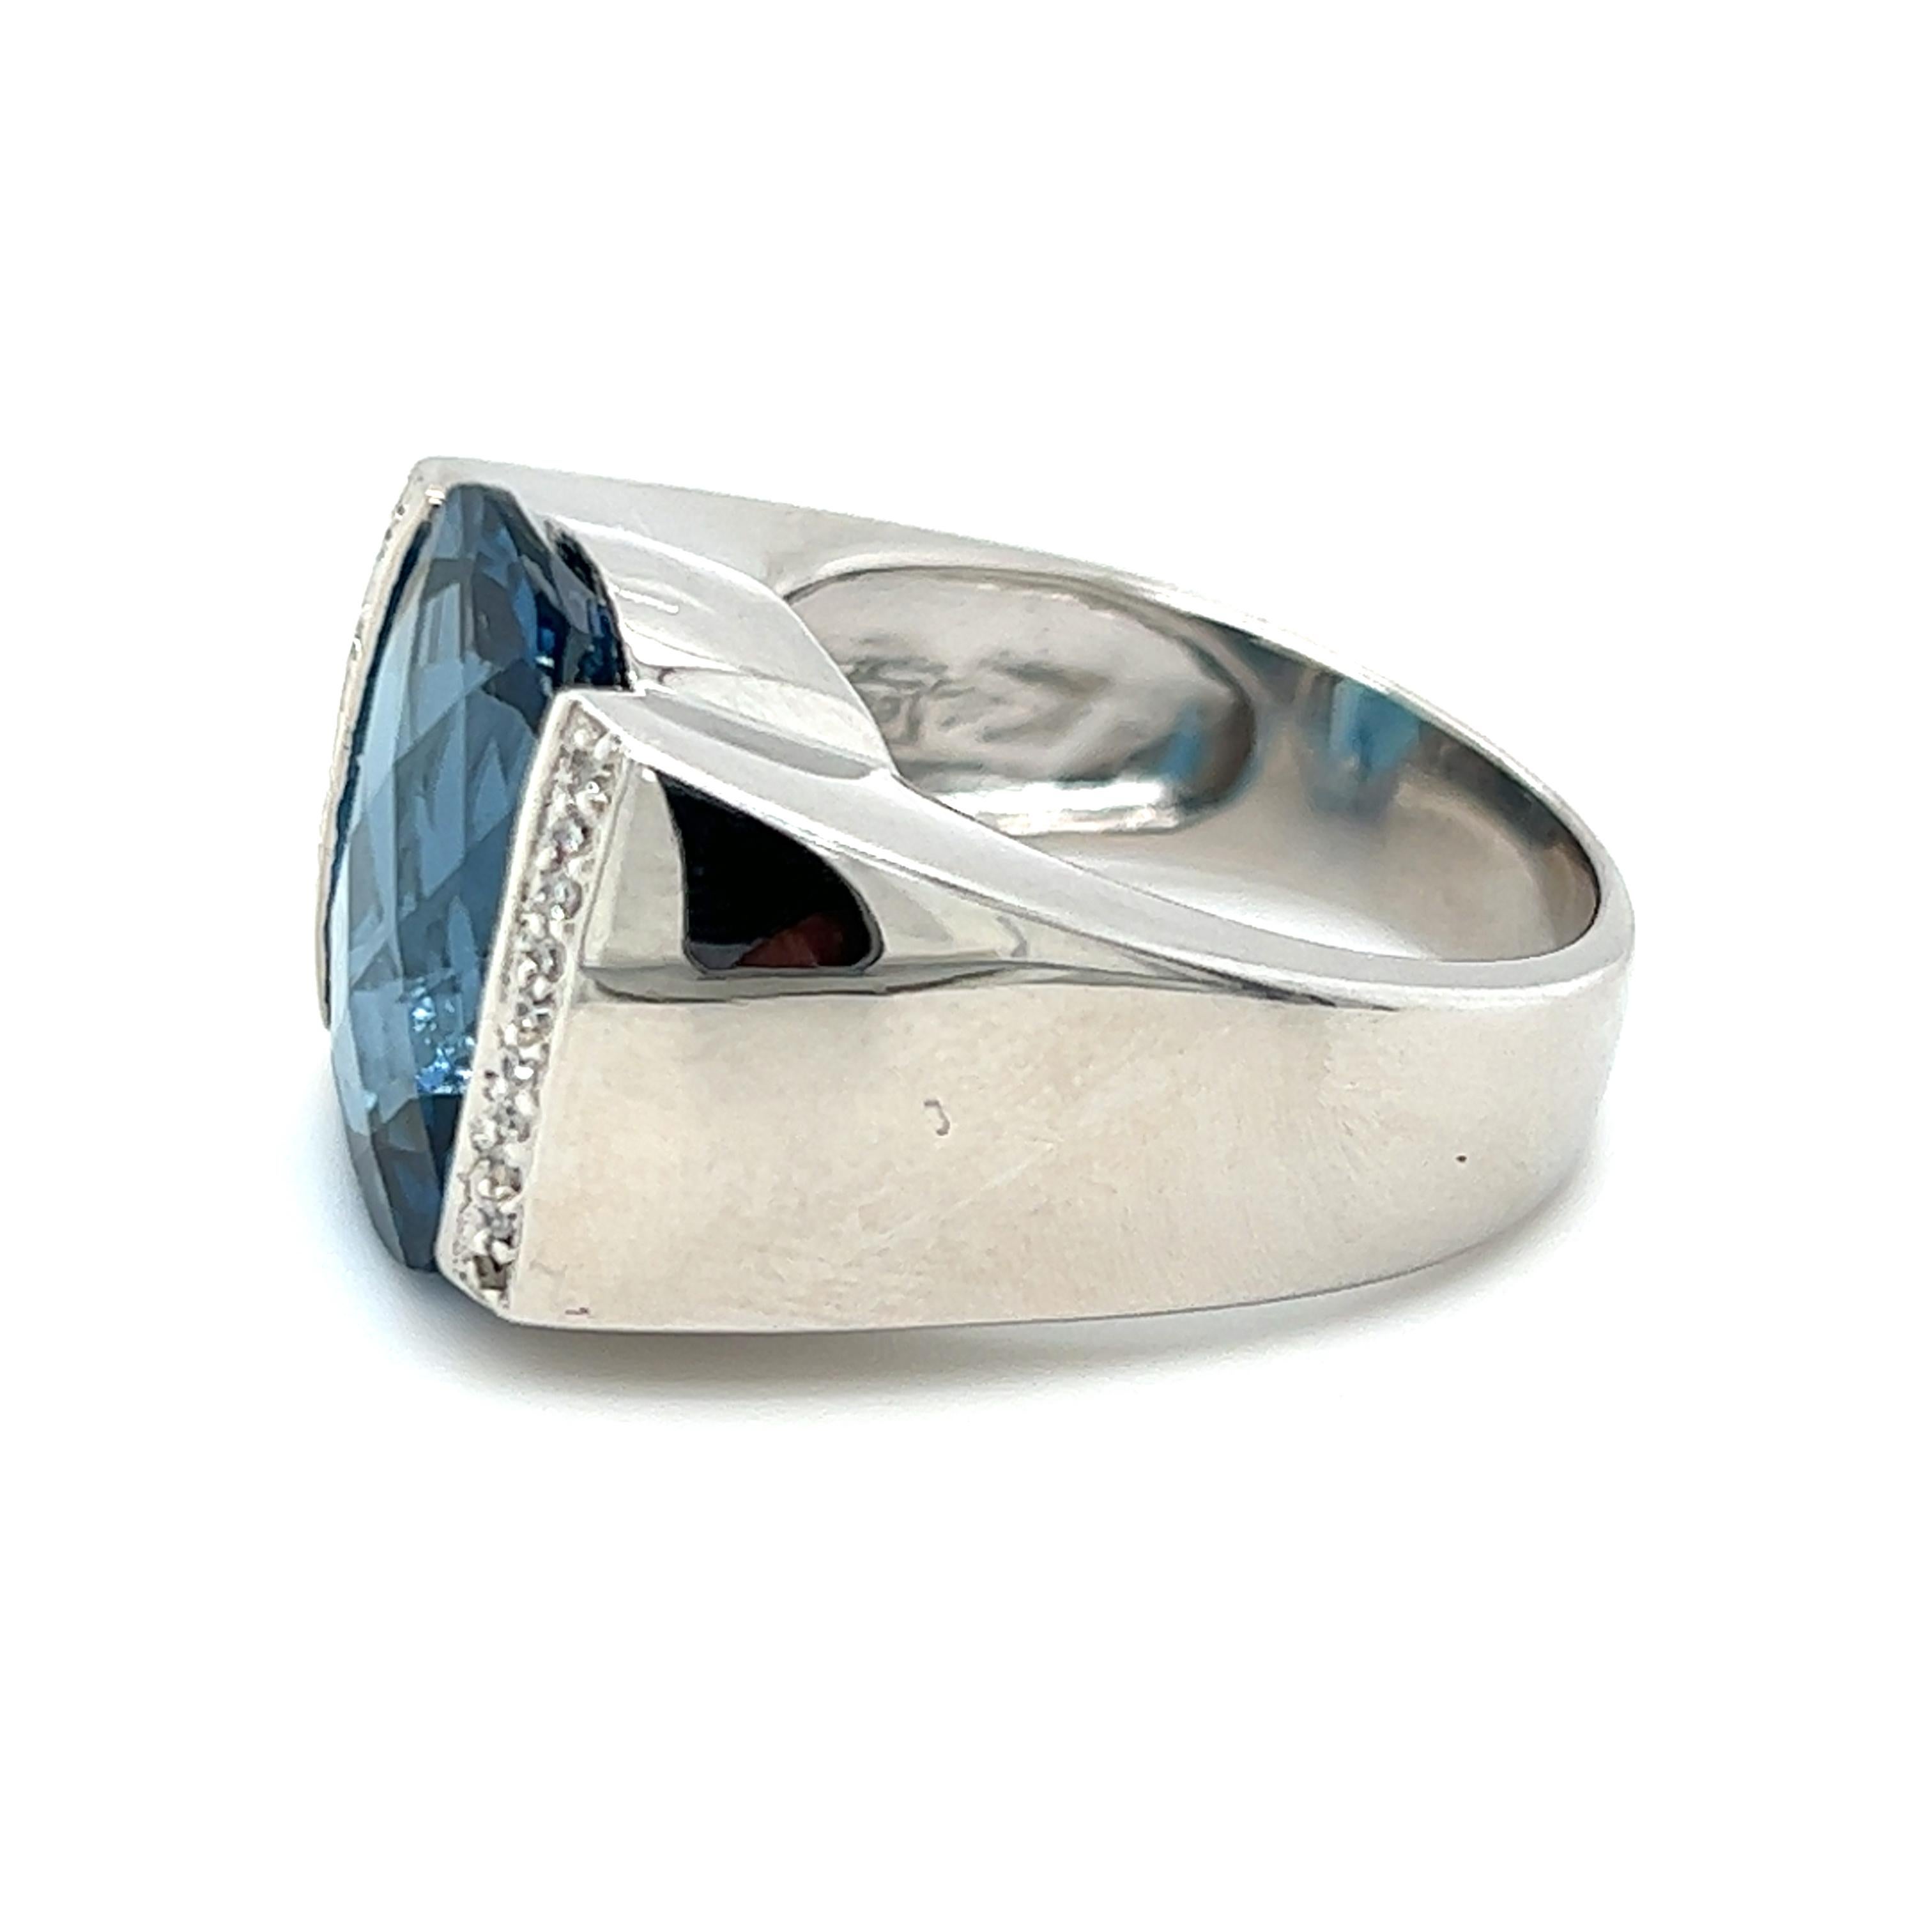 One 14 karat white gold ring, designed by John C. Rinker,  set with one 16.15x11.5mm checkerboard cut London blue topaz stone, approximately 12.00 carat and twenty (20) single cut diamonds, approximately 0.10 carat total weight with matching I/J